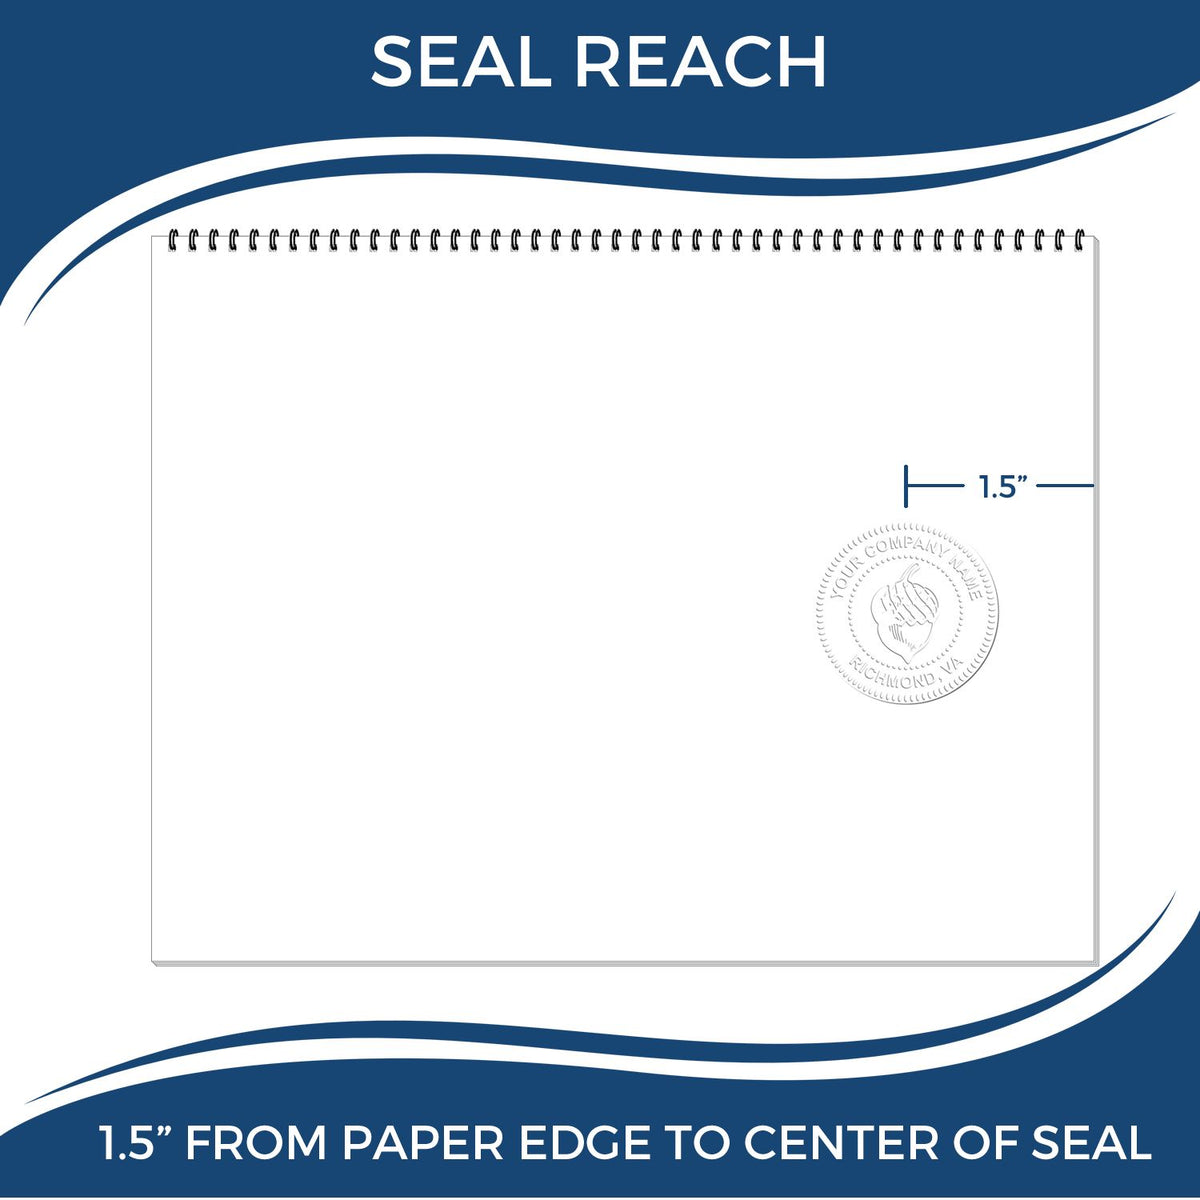 An infographic showing the seal reach which is represented by a ruler and a miniature seal image of the New Mexico Desk Architect Embossing Seal